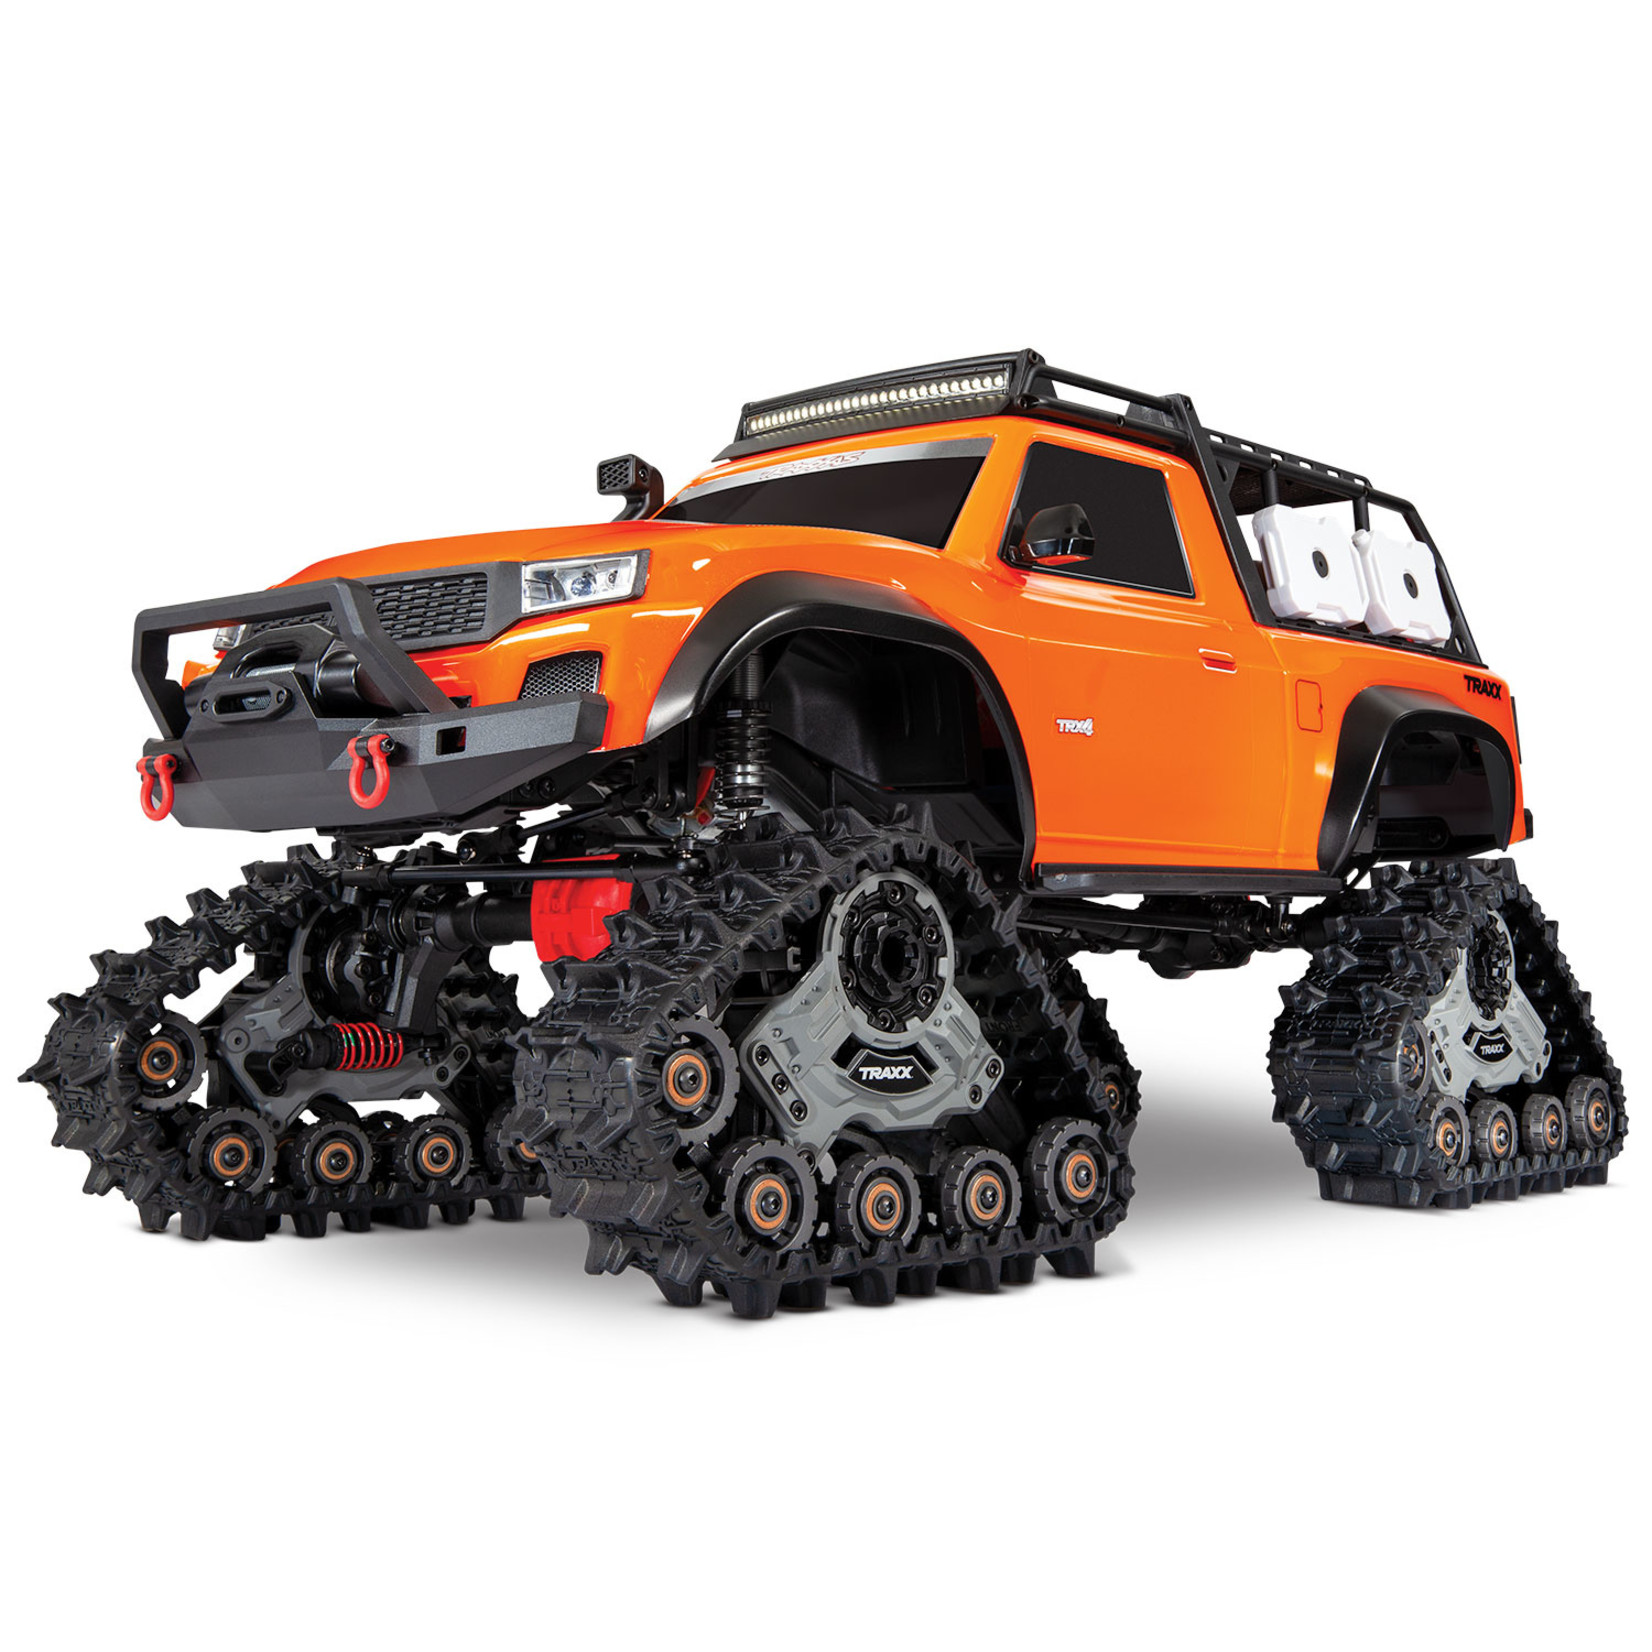 Traxxas TRX-4 with Deep-Terrain Traxx: 1/10 Scale 4WD Crawler Truck with LED lights